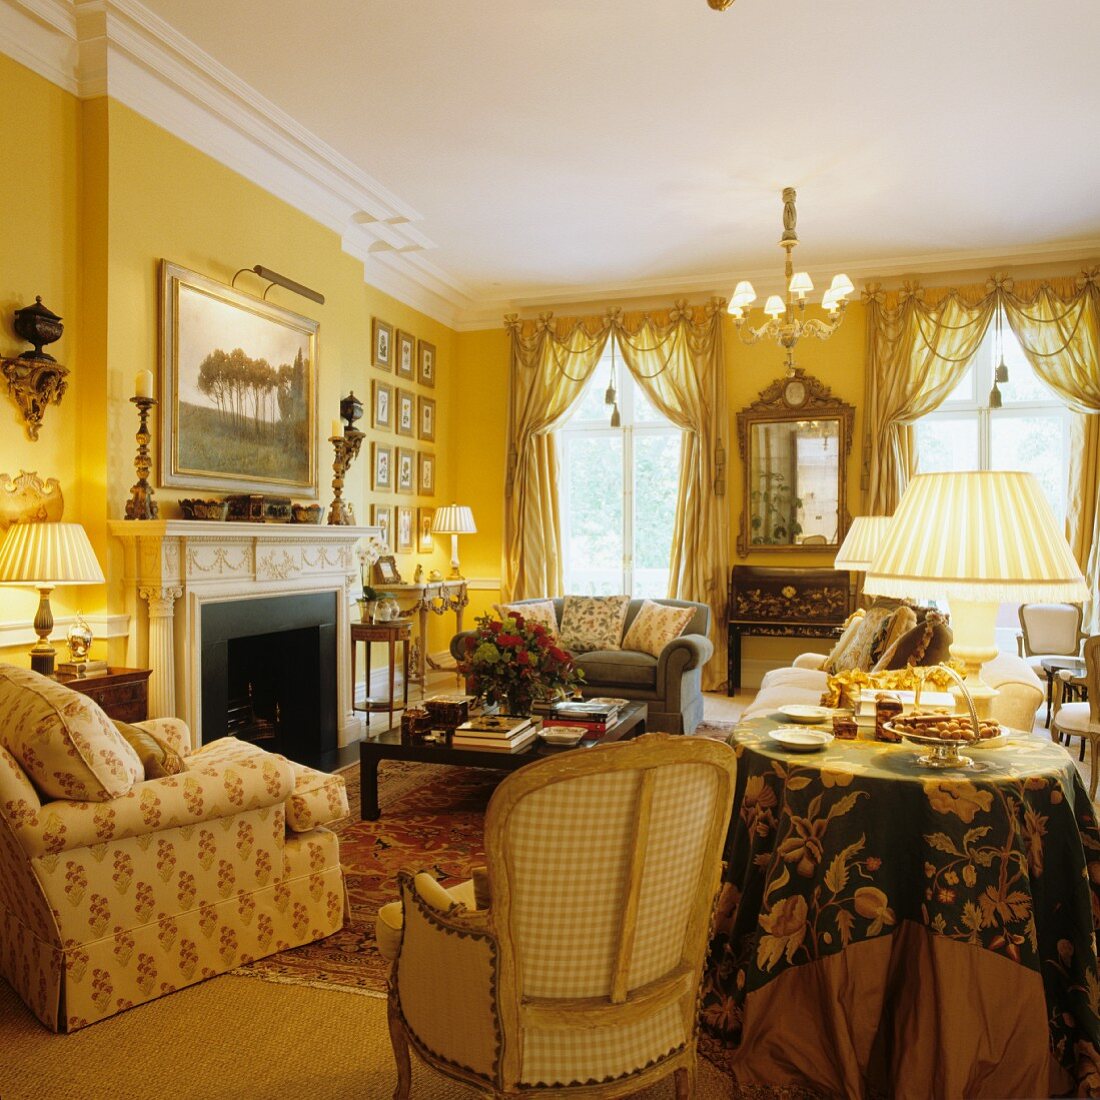 Grand living room with yellow-painted walls and various types of seating in front of open fireplace